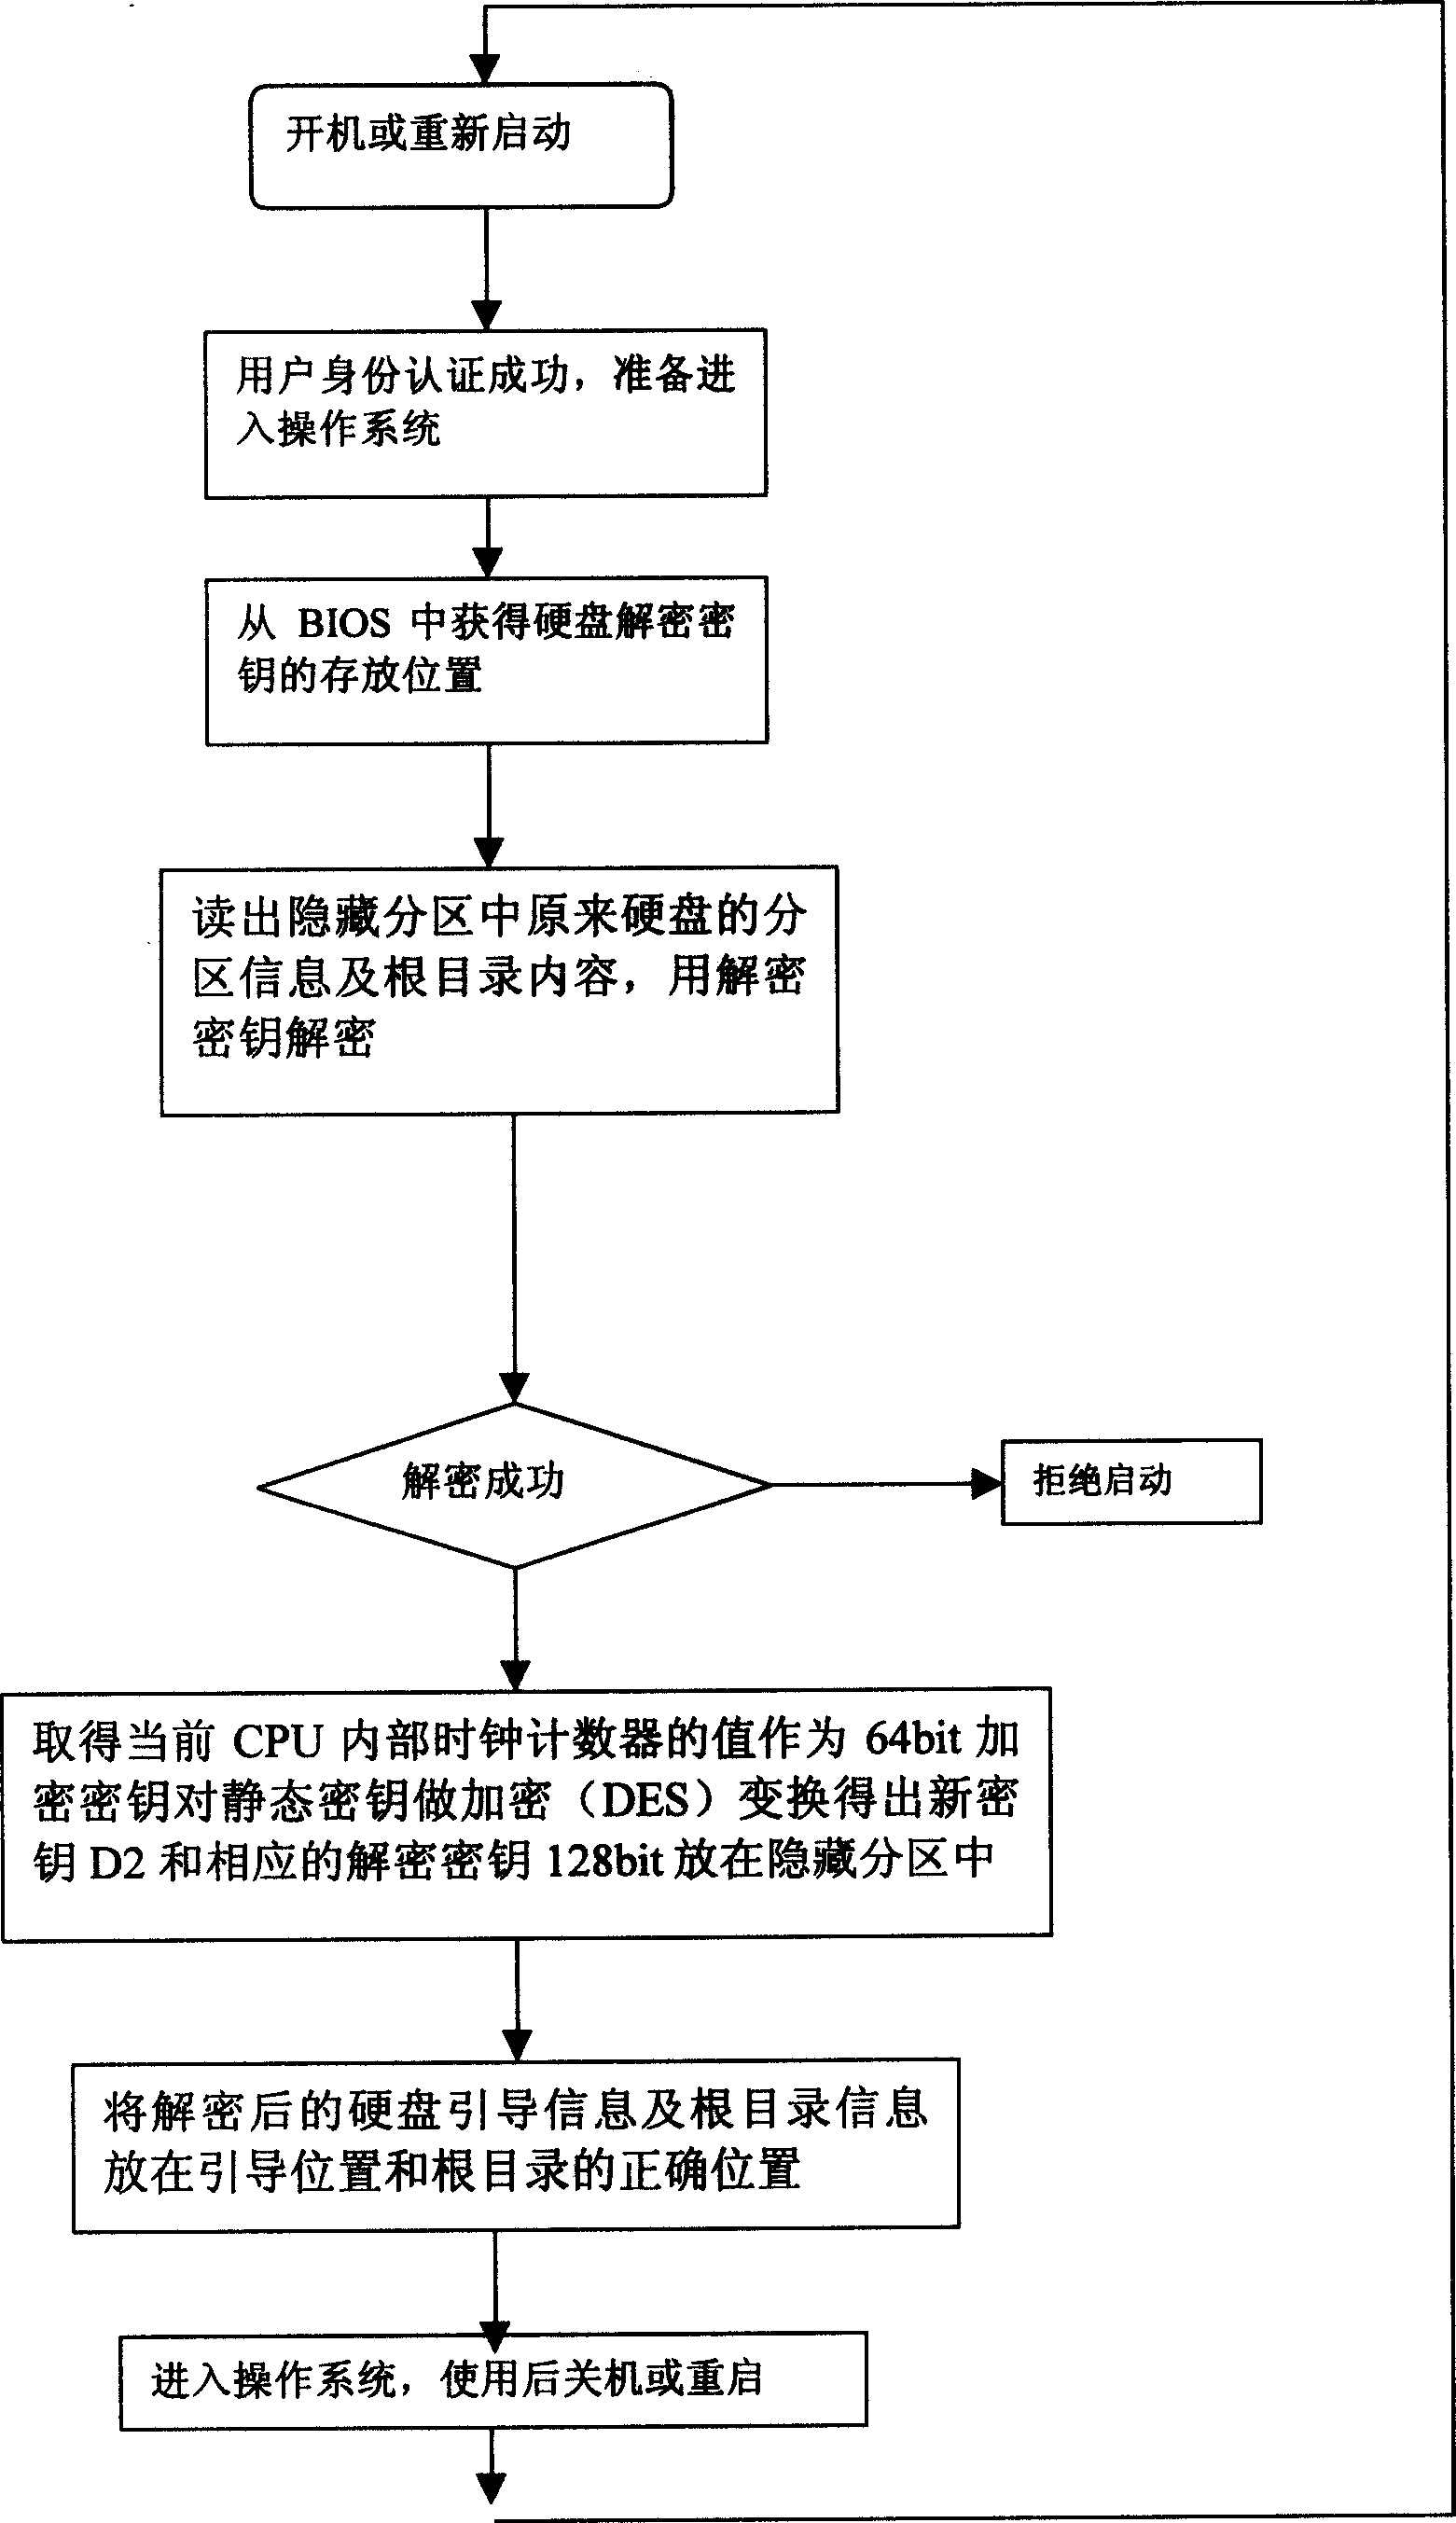 Method and device for realizing computer safety and enciphering based on identity confirmation